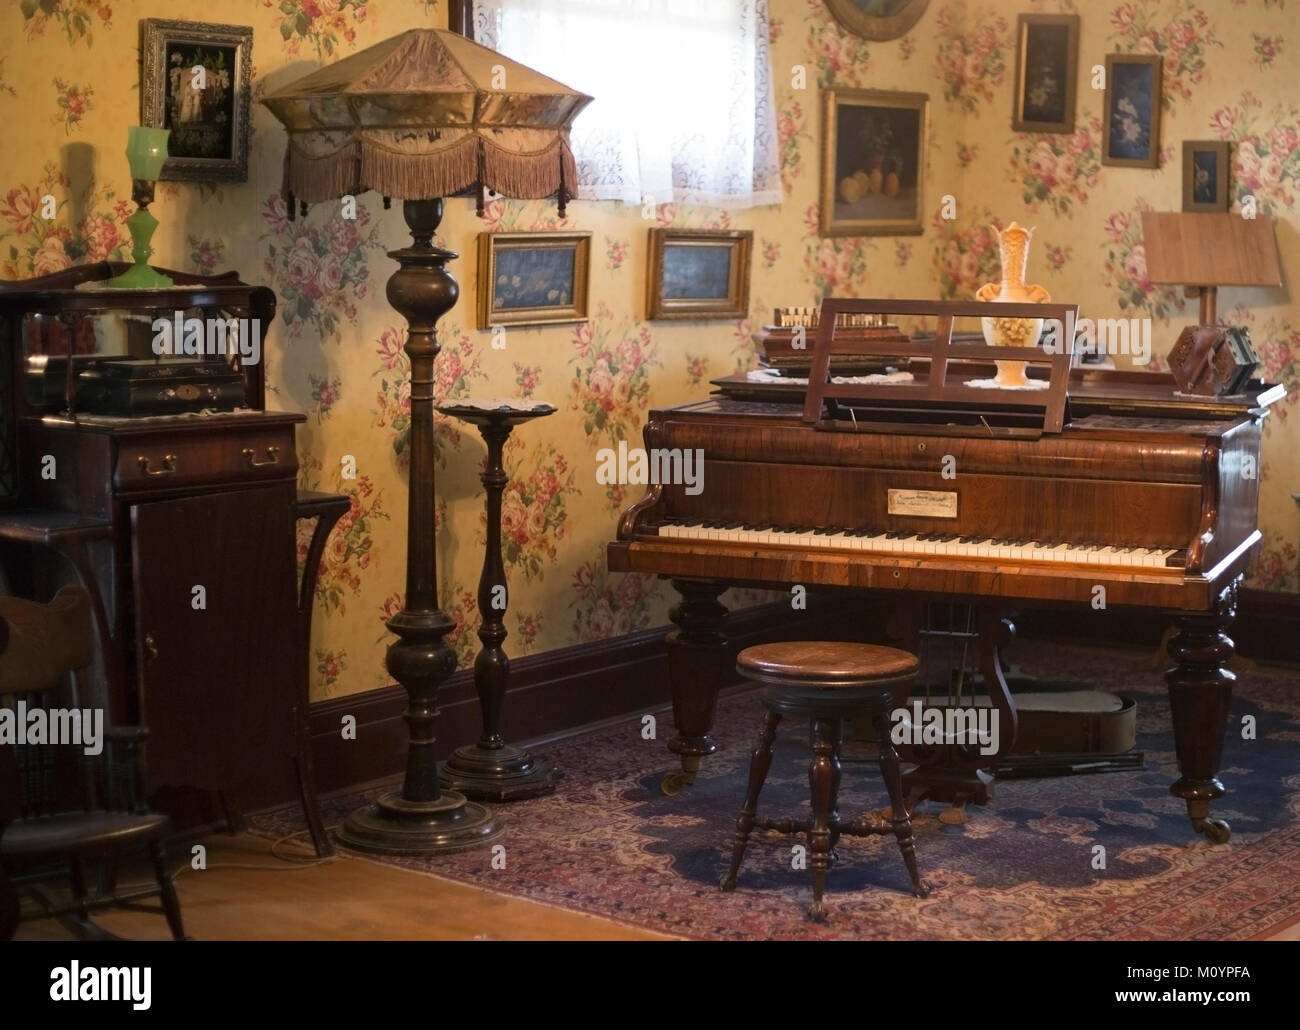 Piano room on display in the Thorpe House, a Victorian house built in 1886 and now restored in Heritage Park, Calgary, Alberta, Canada Stock Photo